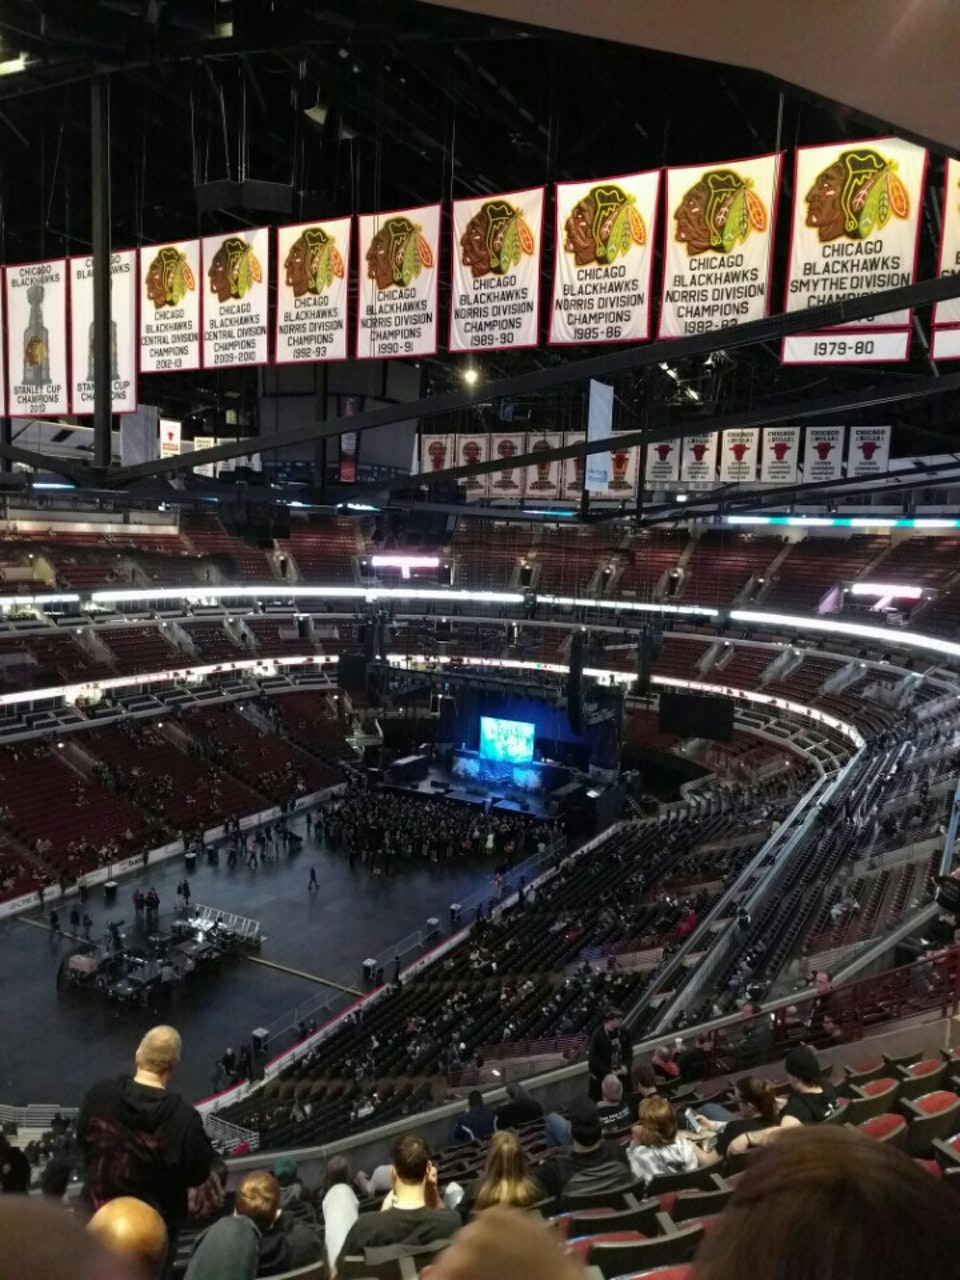 section 322, row 14 seat view  for concert - united center